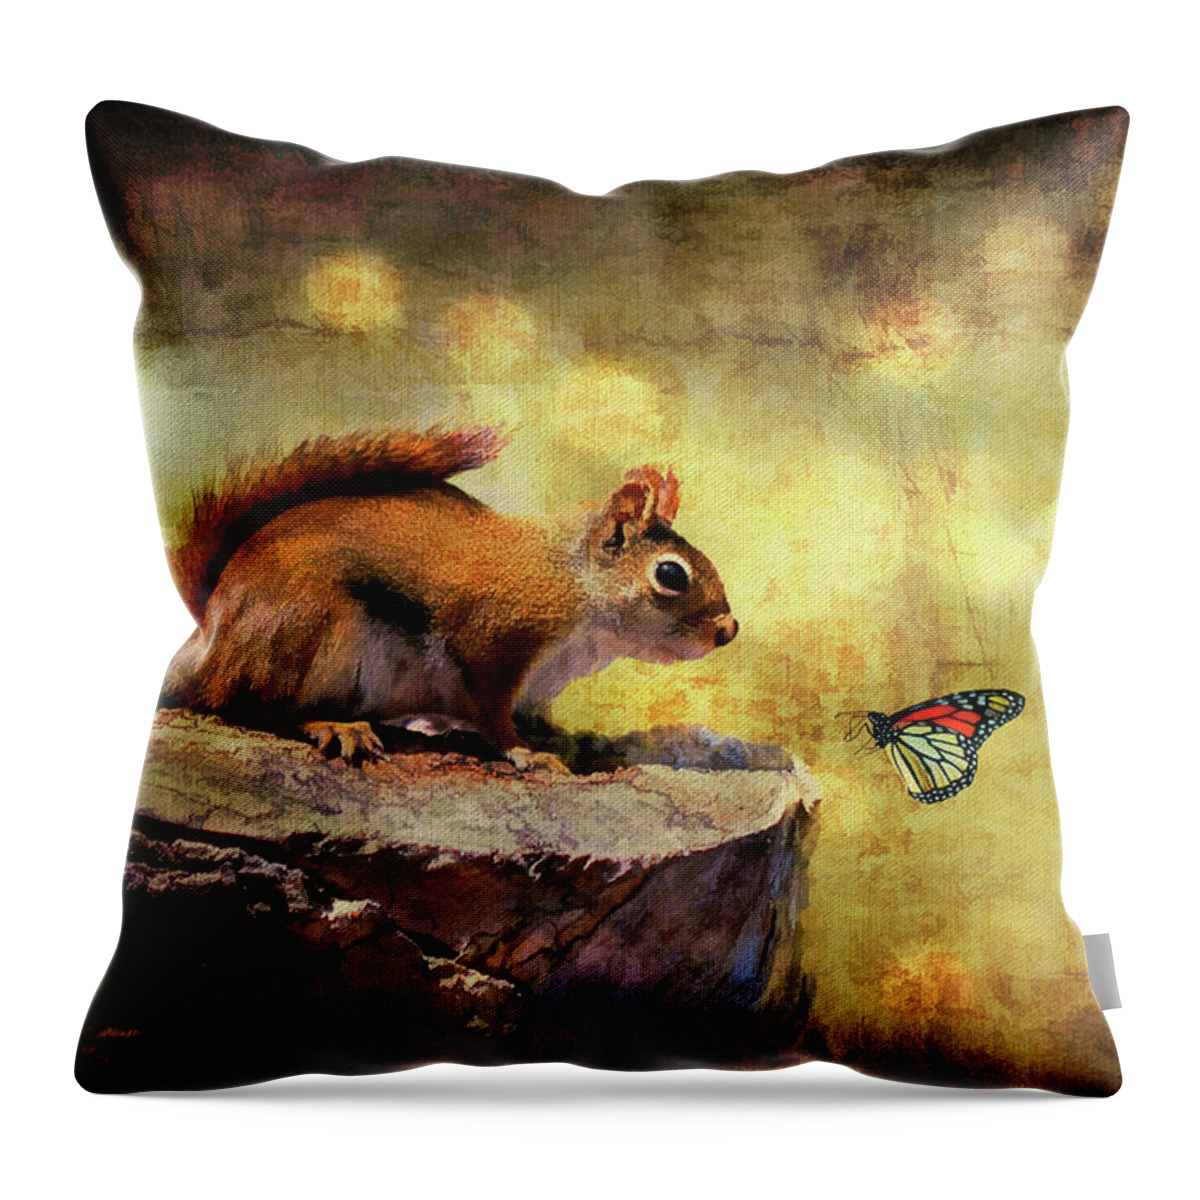 Wildlife Throw Pillow featuring the photograph Woodland Wonder by Lois Bryan